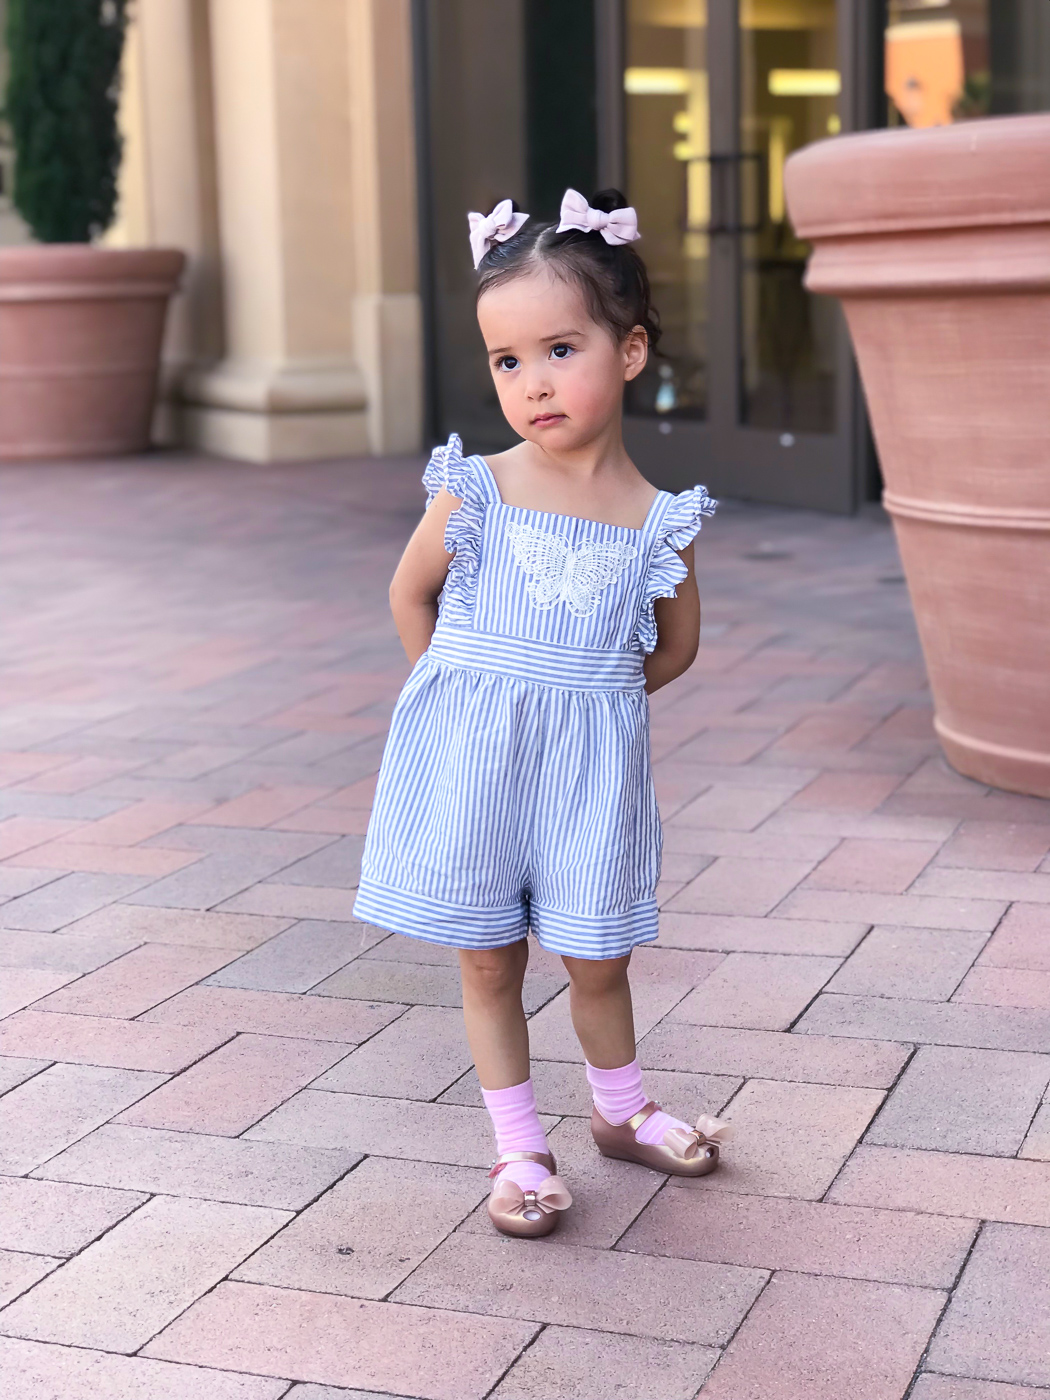 Toddler Two Year Old Summer Outfit Ideas